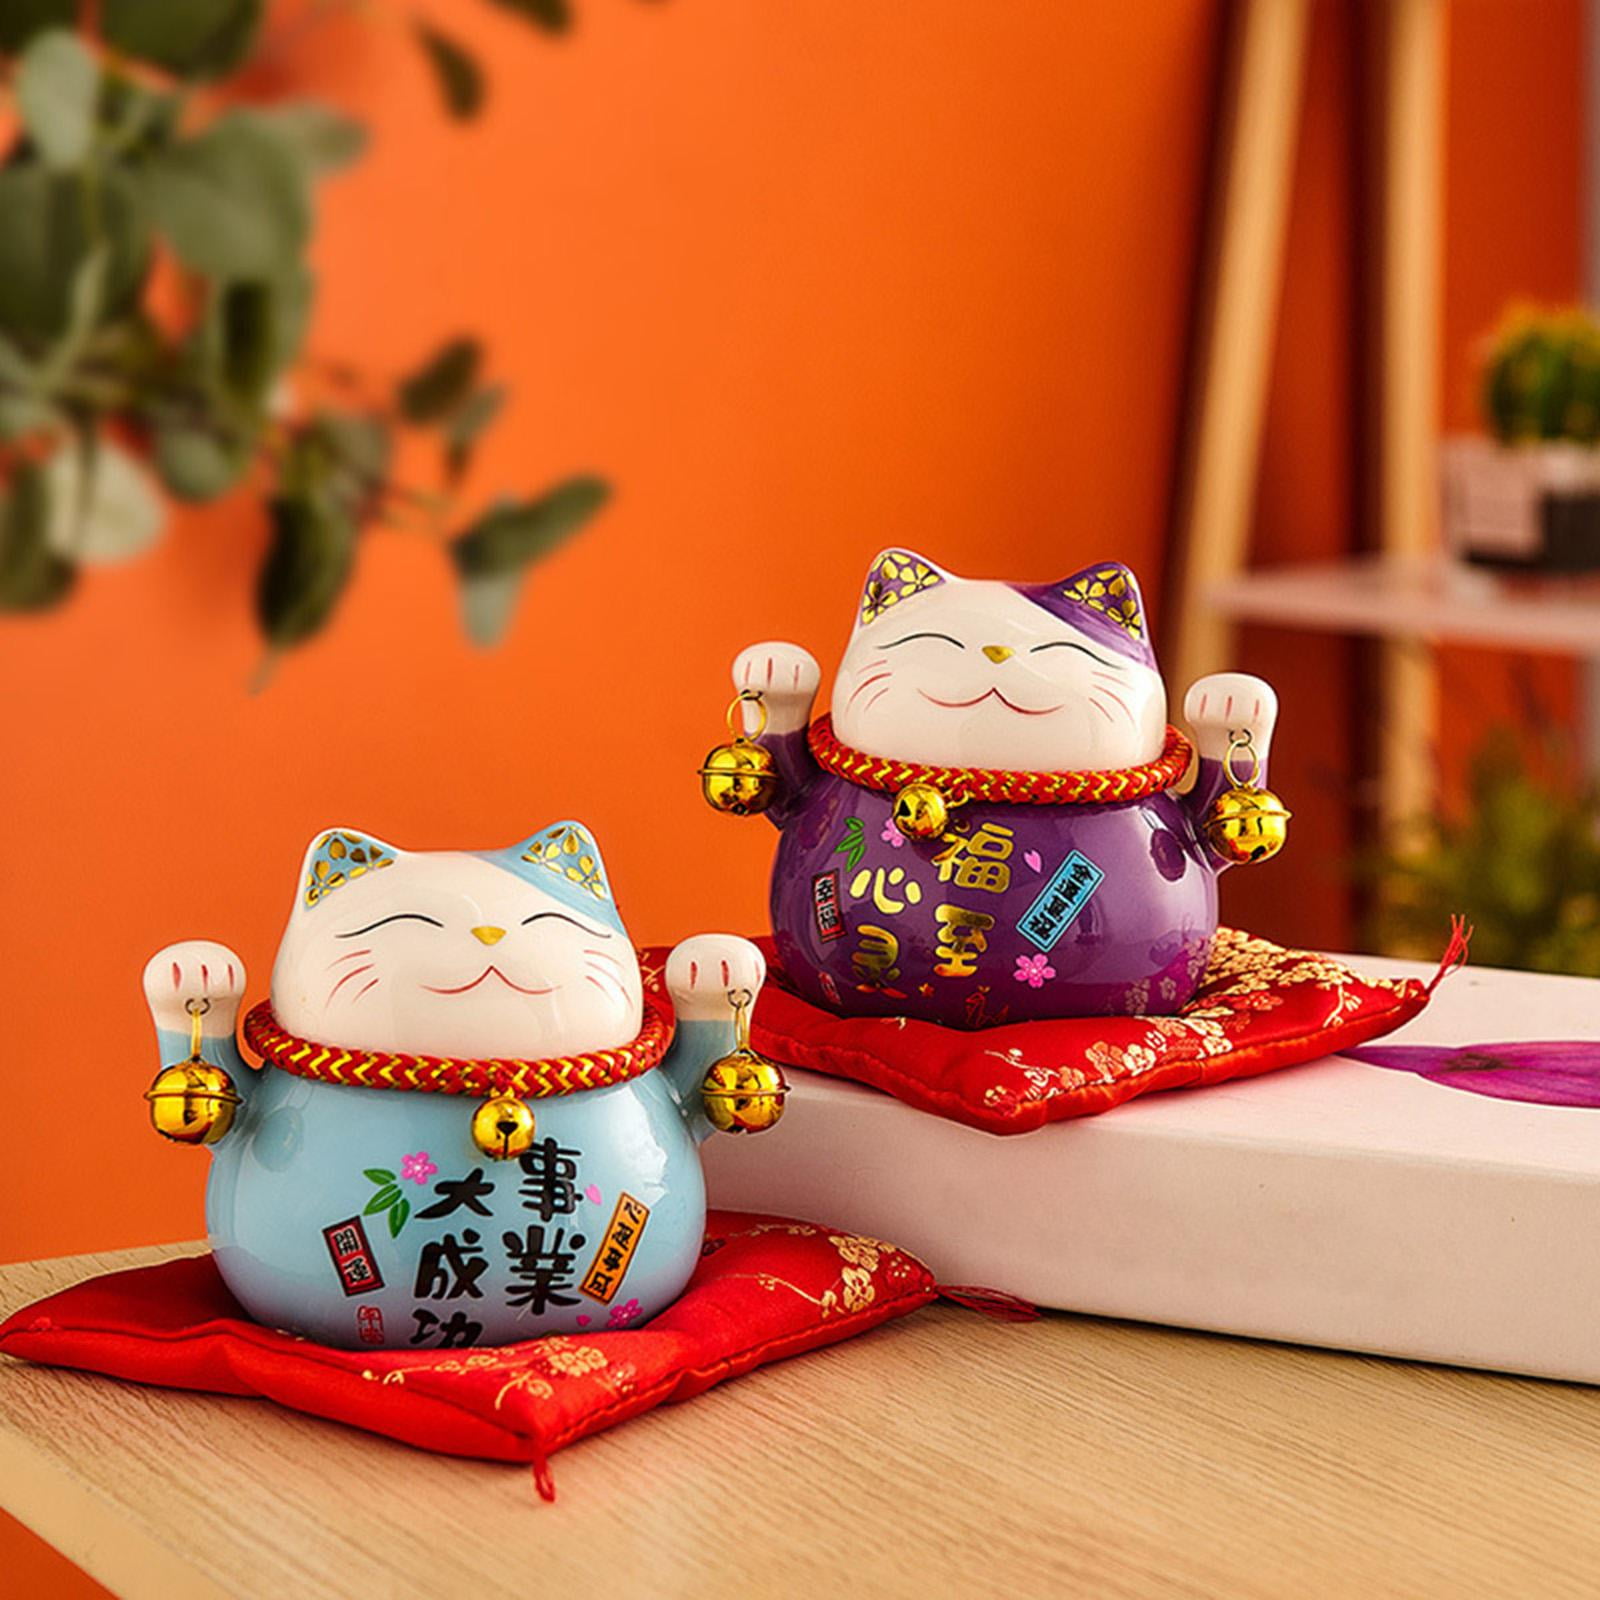 Neko Lucky Cat, with Wealth Good Luck Coming Japanese Lucky Cat, Healthy 